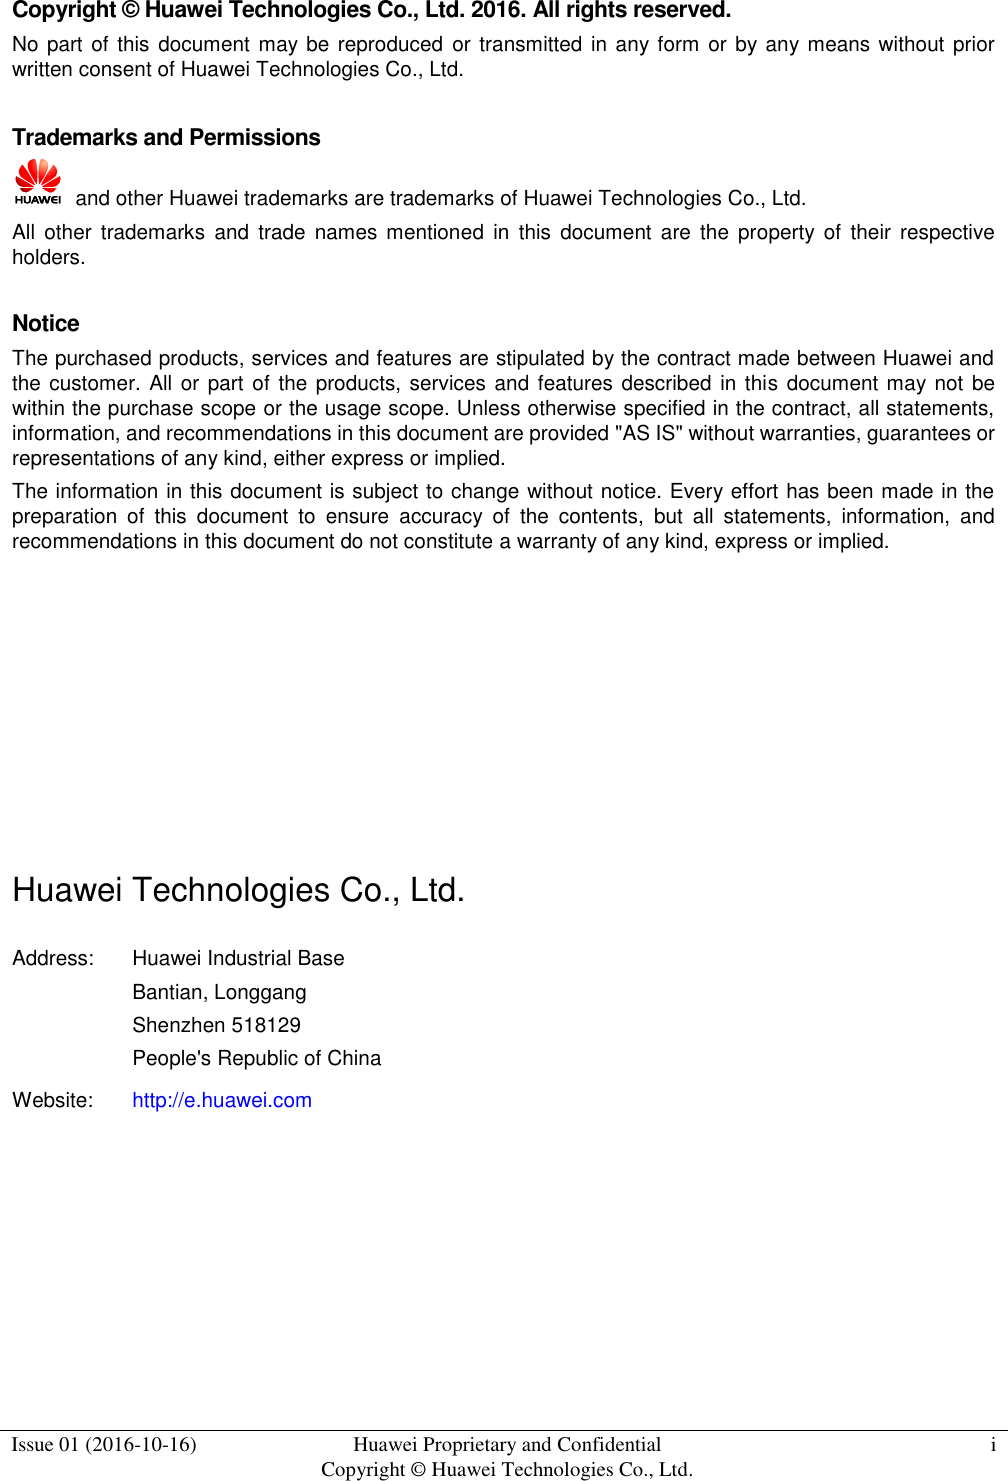  Issue 01 (2016-10-16) Huawei Proprietary and Confidential Copyright © Huawei Technologies Co., Ltd. i  Copyright © Huawei Technologies Co., Ltd. 2016. All rights reserved. No part of this  document  may be reproduced  or transmitted in any form or by any means without prior written consent of Huawei Technologies Co., Ltd.  Trademarks and Permissions   and other Huawei trademarks are trademarks of Huawei Technologies Co., Ltd. All  other  trademarks  and  trade  names mentioned  in  this  document  are  the  property of  their  respective holders.  Notice The purchased products, services and features are stipulated by the contract made between Huawei and the customer.  All or part of the products, services and features described  in this  document may not be within the purchase scope or the usage scope. Unless otherwise specified in the contract, all statements, information, and recommendations in this document are provided &quot;AS IS&quot; without warranties, guarantees or representations of any kind, either express or implied. The information in this document is subject to change without notice. Every effort has been made in the preparation  of  this  document  to  ensure  accuracy  of  the  contents,  but  all  statements,  information,  and recommendations in this document do not constitute a warranty of any kind, express or implied.        Huawei Technologies Co., Ltd. Address: Huawei Industrial Base Bantian, Longgang Shenzhen 518129 People&apos;s Republic of China Website: http://e.huawei.com   